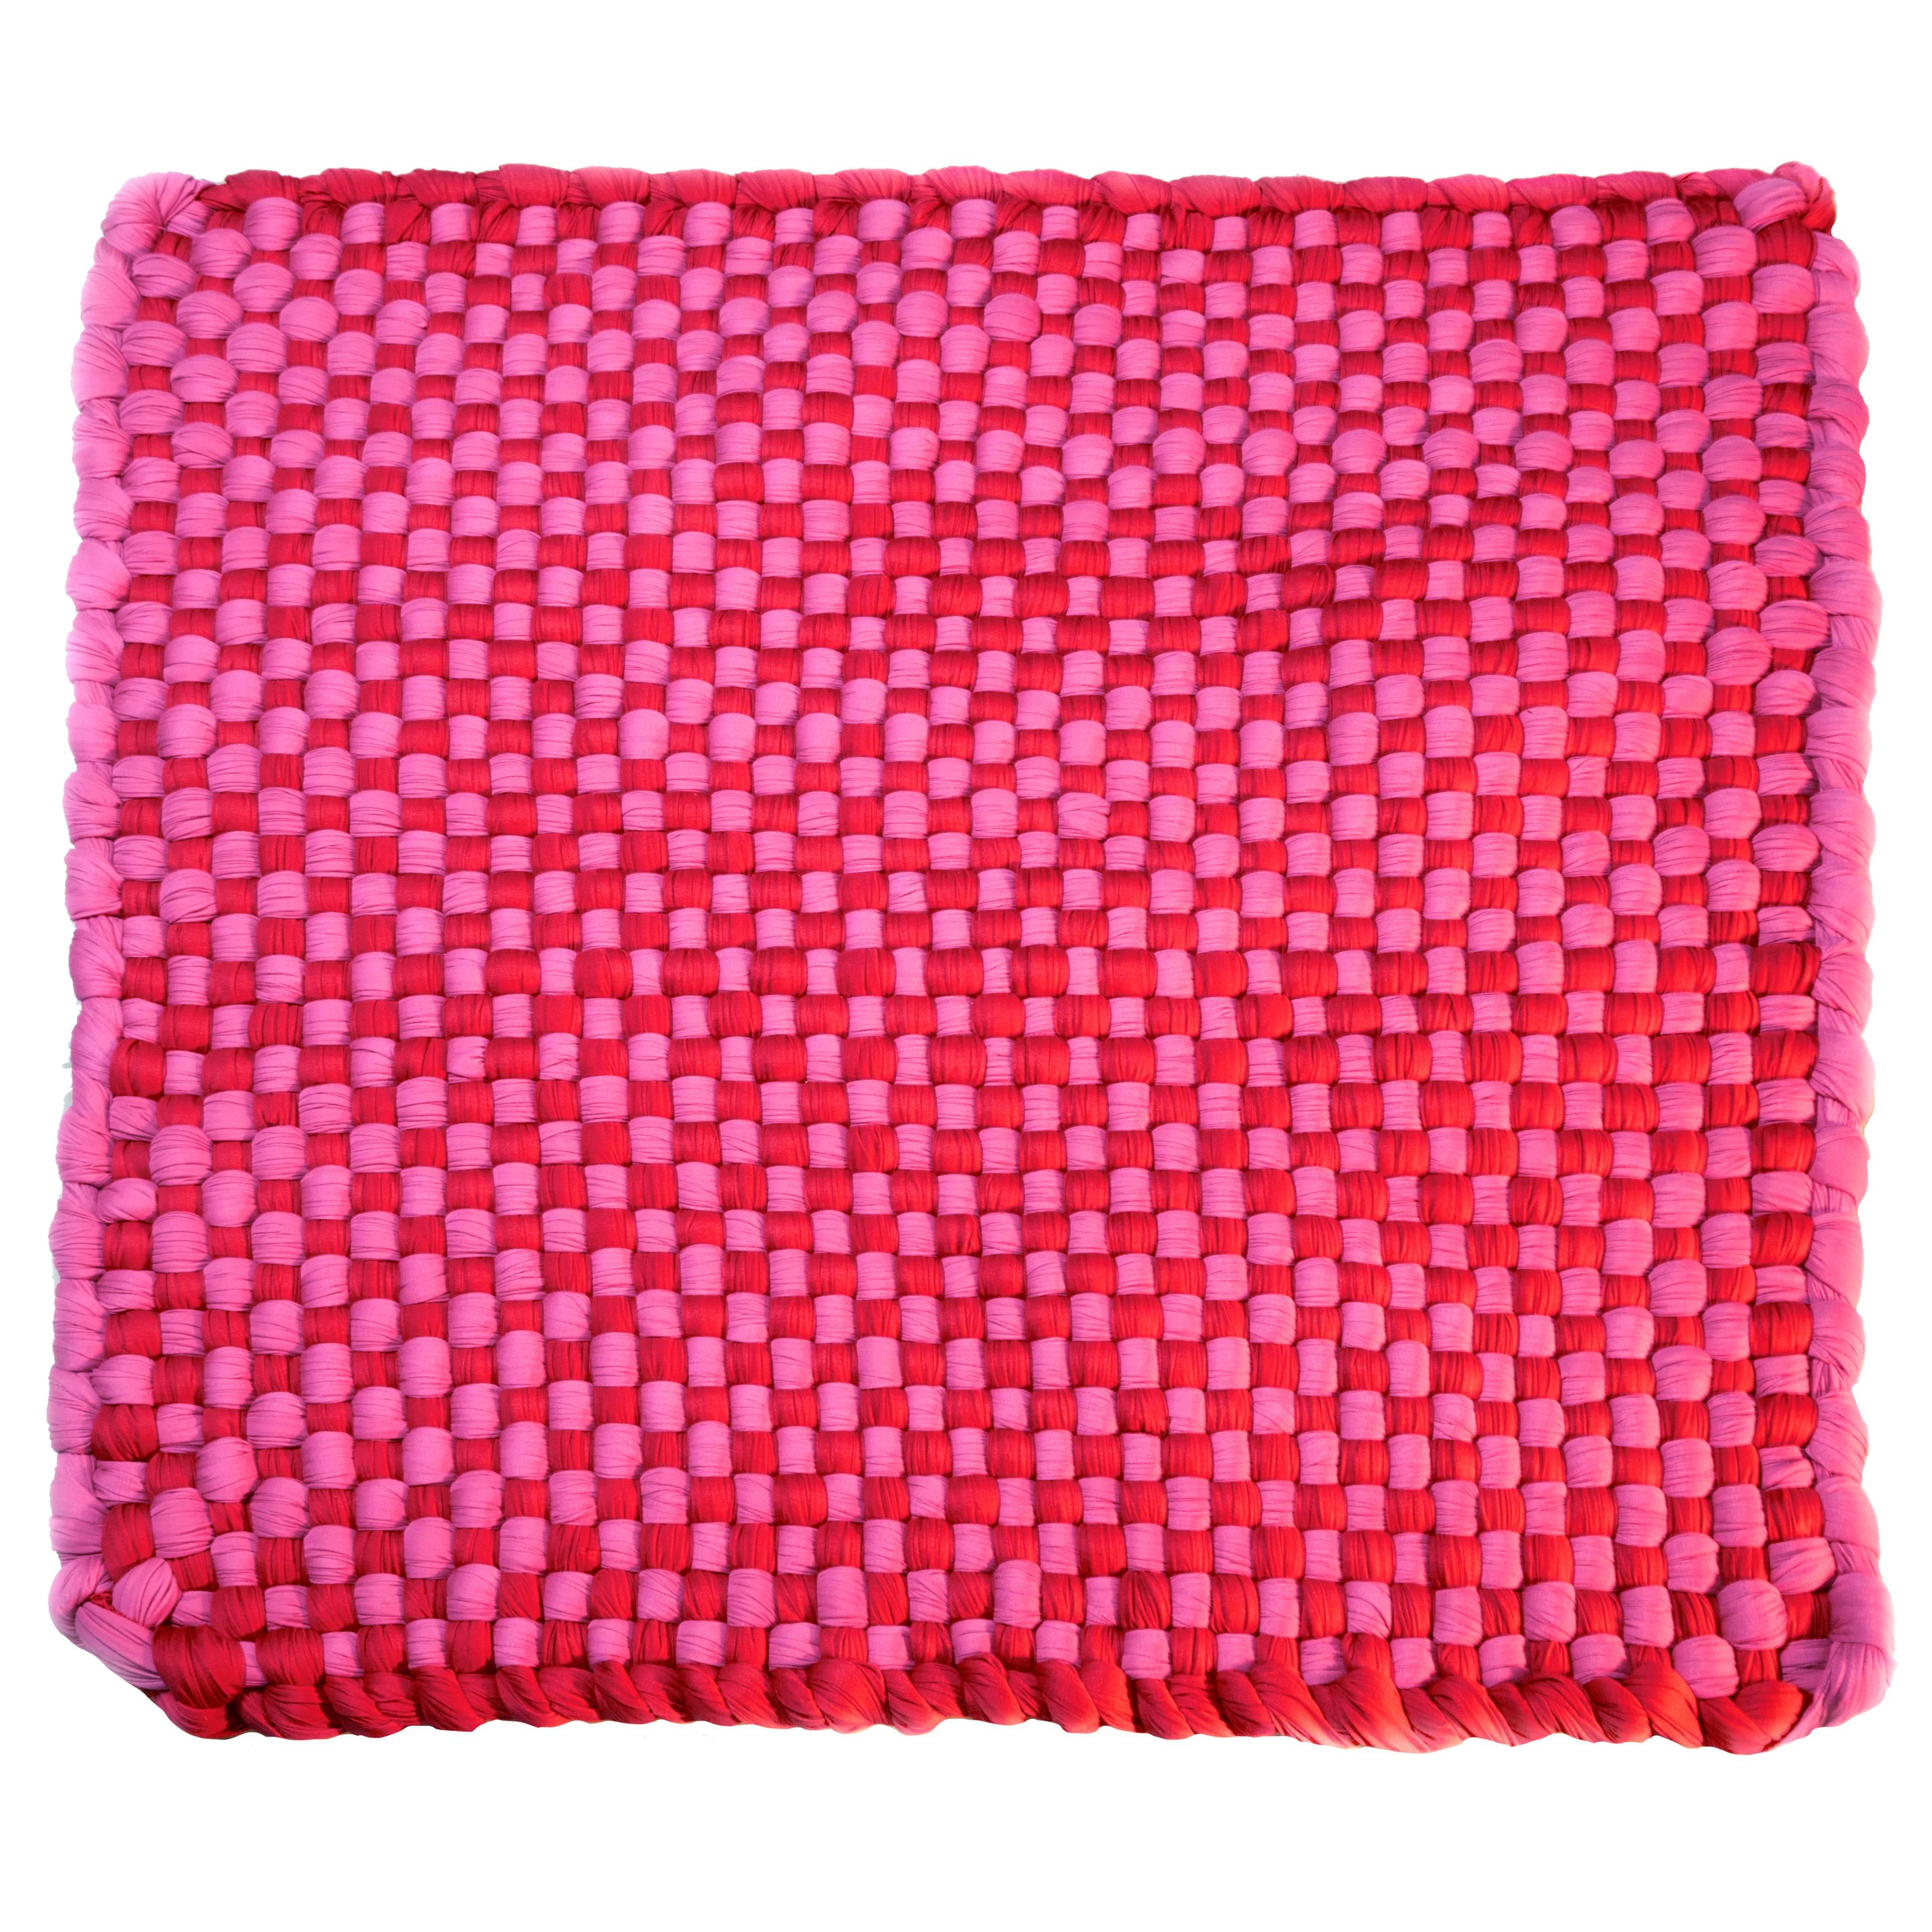 Pink 'Potholder' Rug in Woven Rayon Jersey by WW3 For Sale